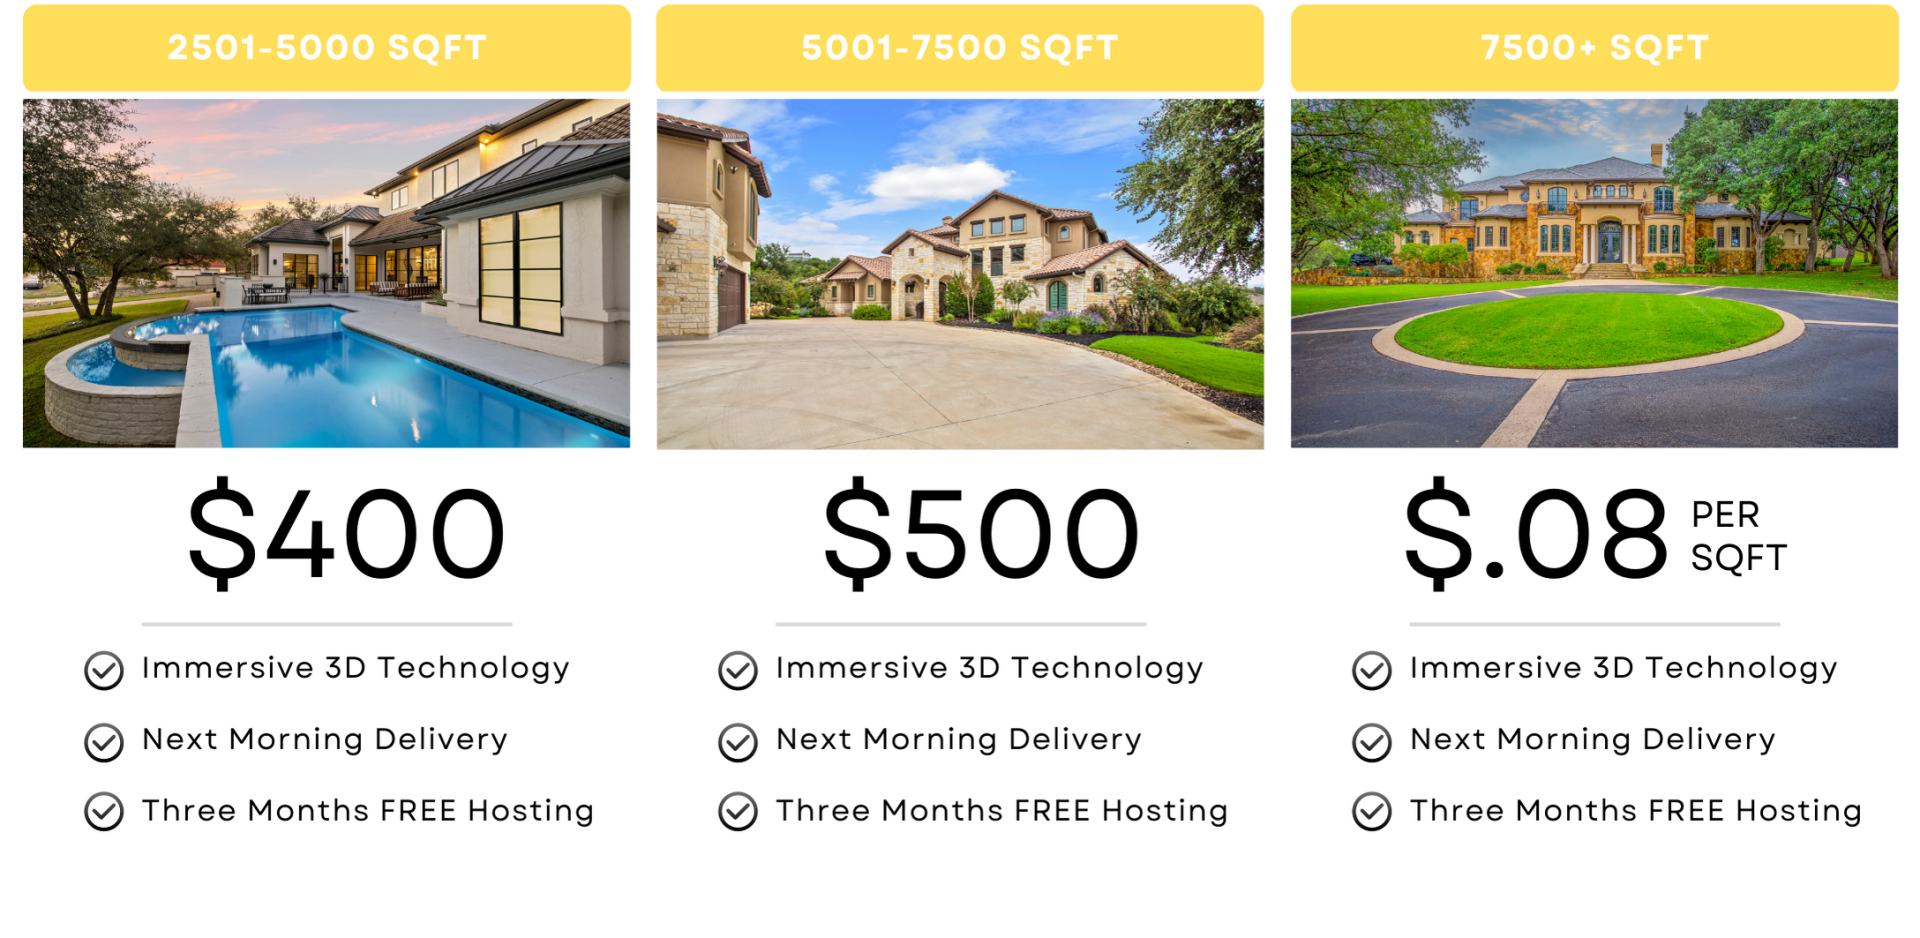 Real Estate Photography Pricing